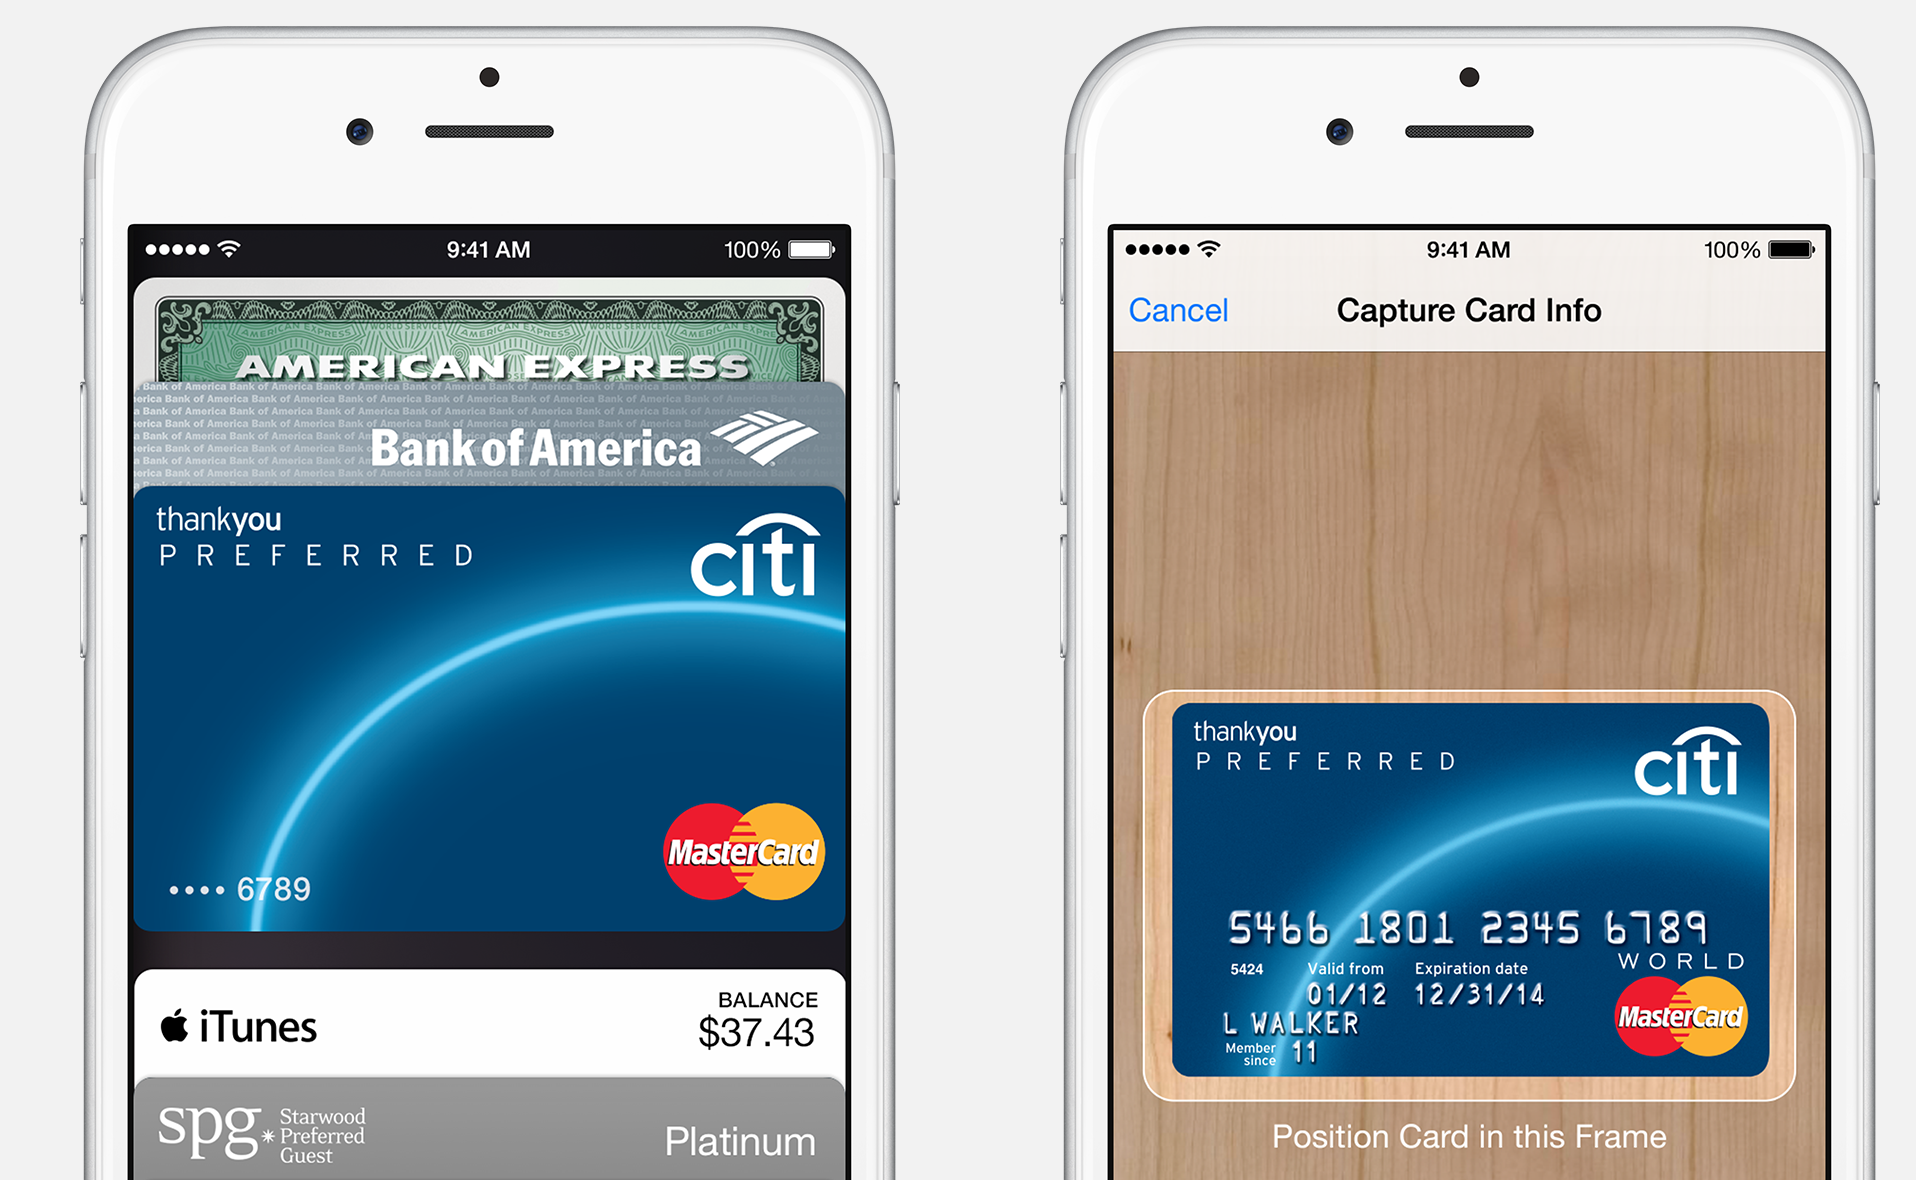 Apple Pay allows you to easily scan cards into the Passbook app, but Citi is allowing some cards to be added without additional verification if they meet certain conditions.